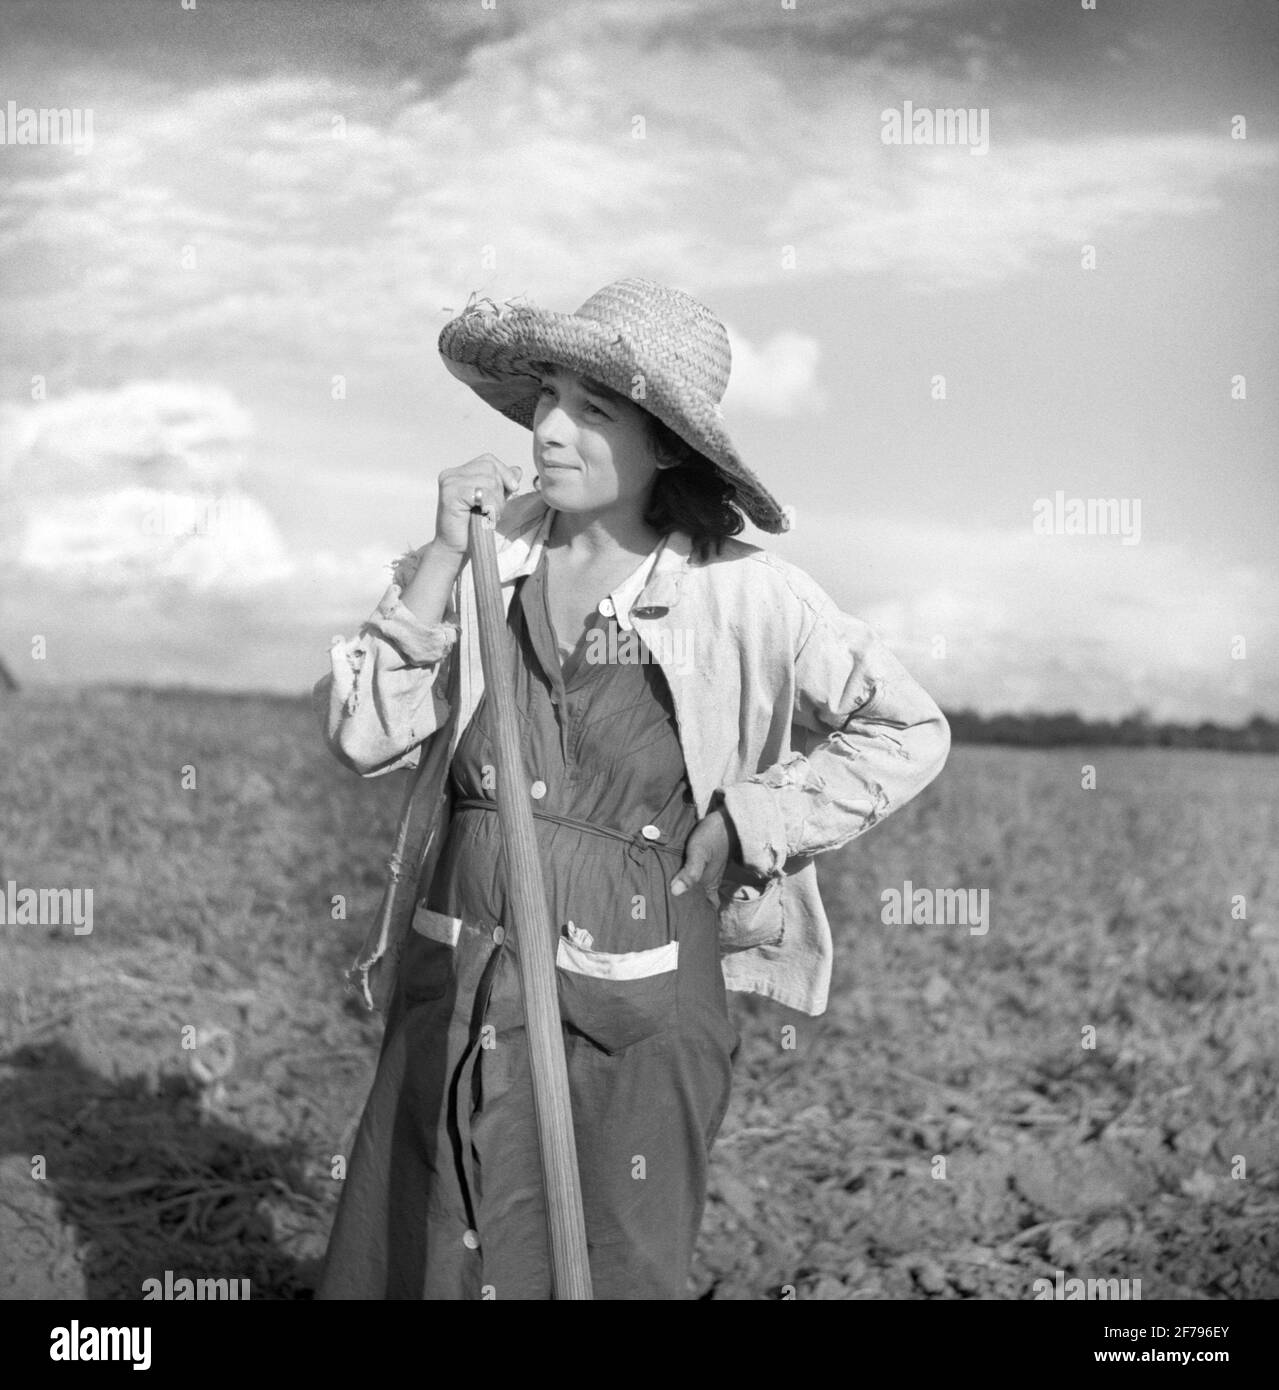 Member of Allen Plantation Cooperative Association resting from hoeing Cotton, Near Natchitoches, Louisiana, USA, Marion Post Wolcott, U.S. Farm Security Administration, June 1940 Stock Photo